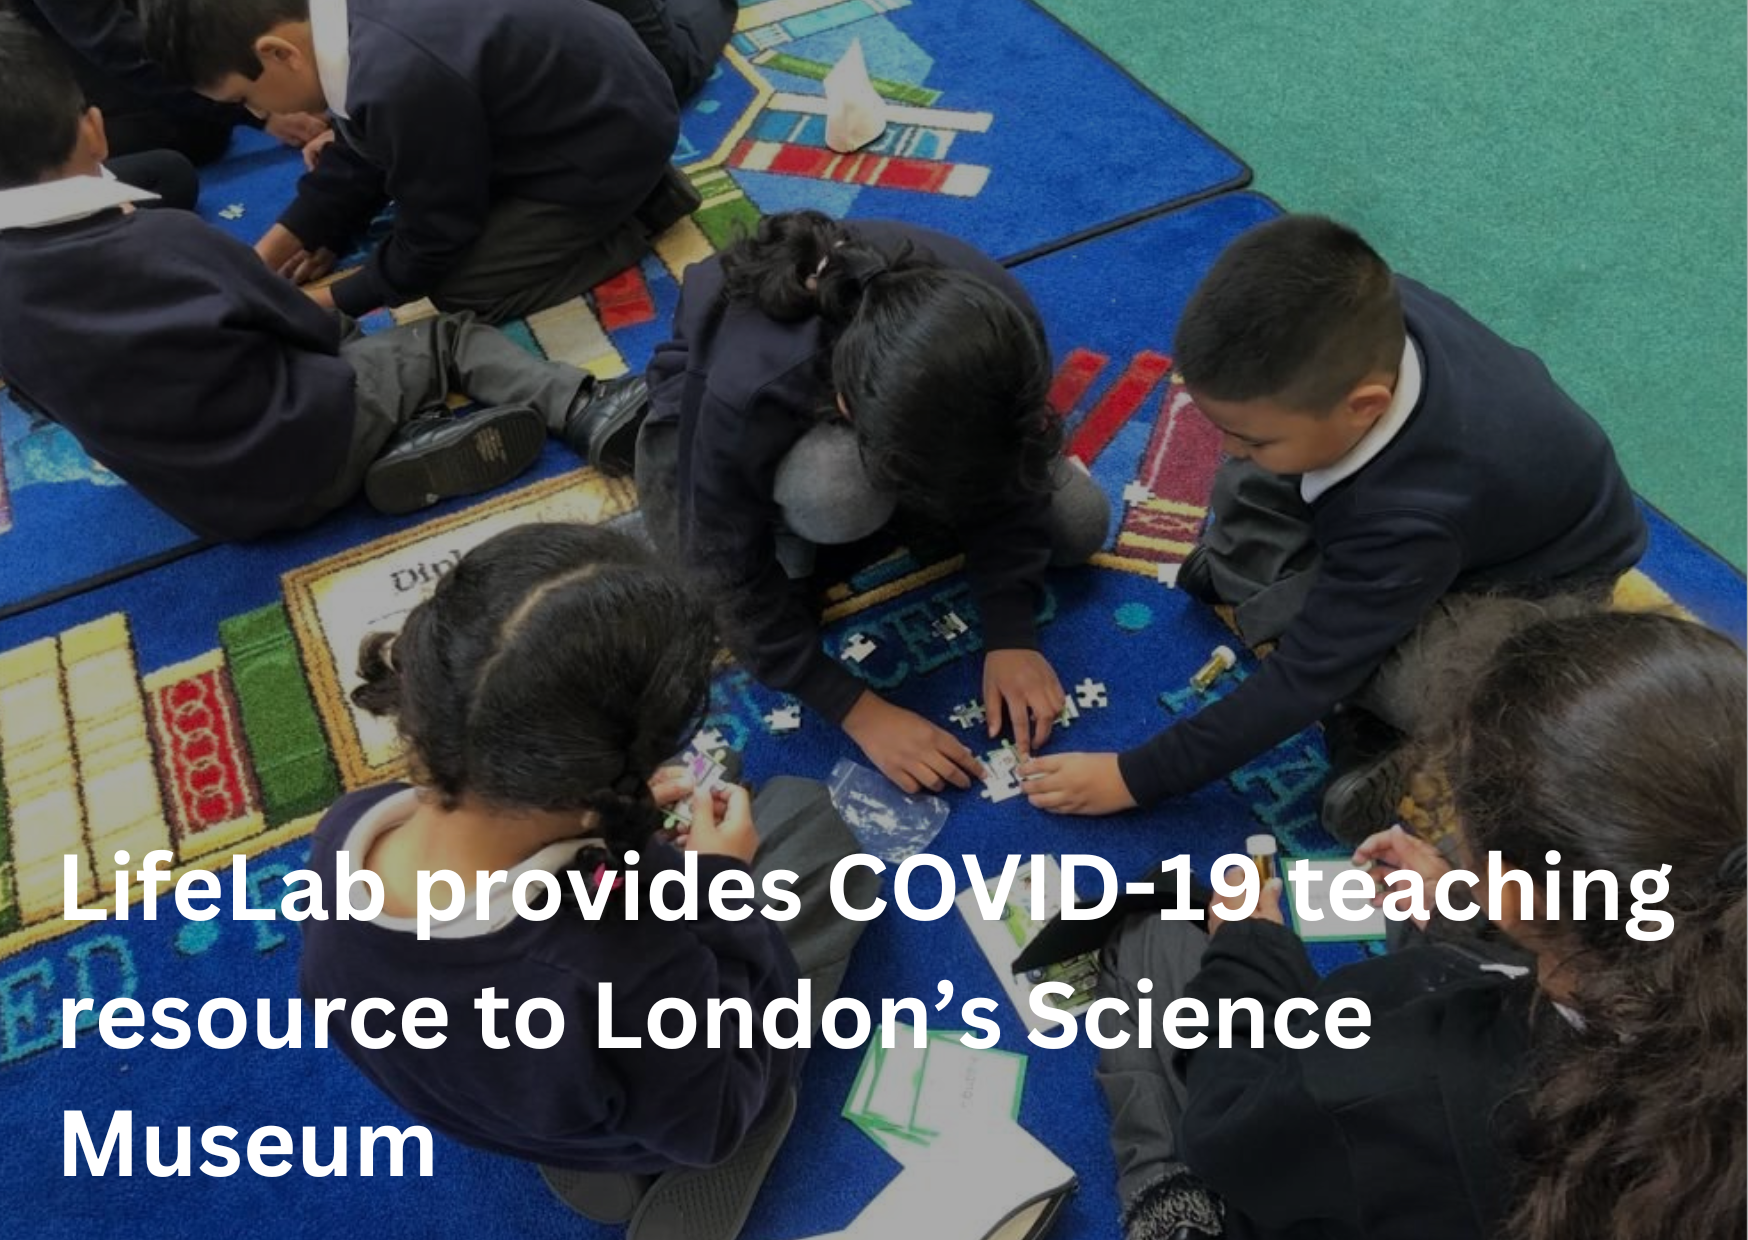 LifeLab provides COVID-19 teaching resources to London's Science Museum